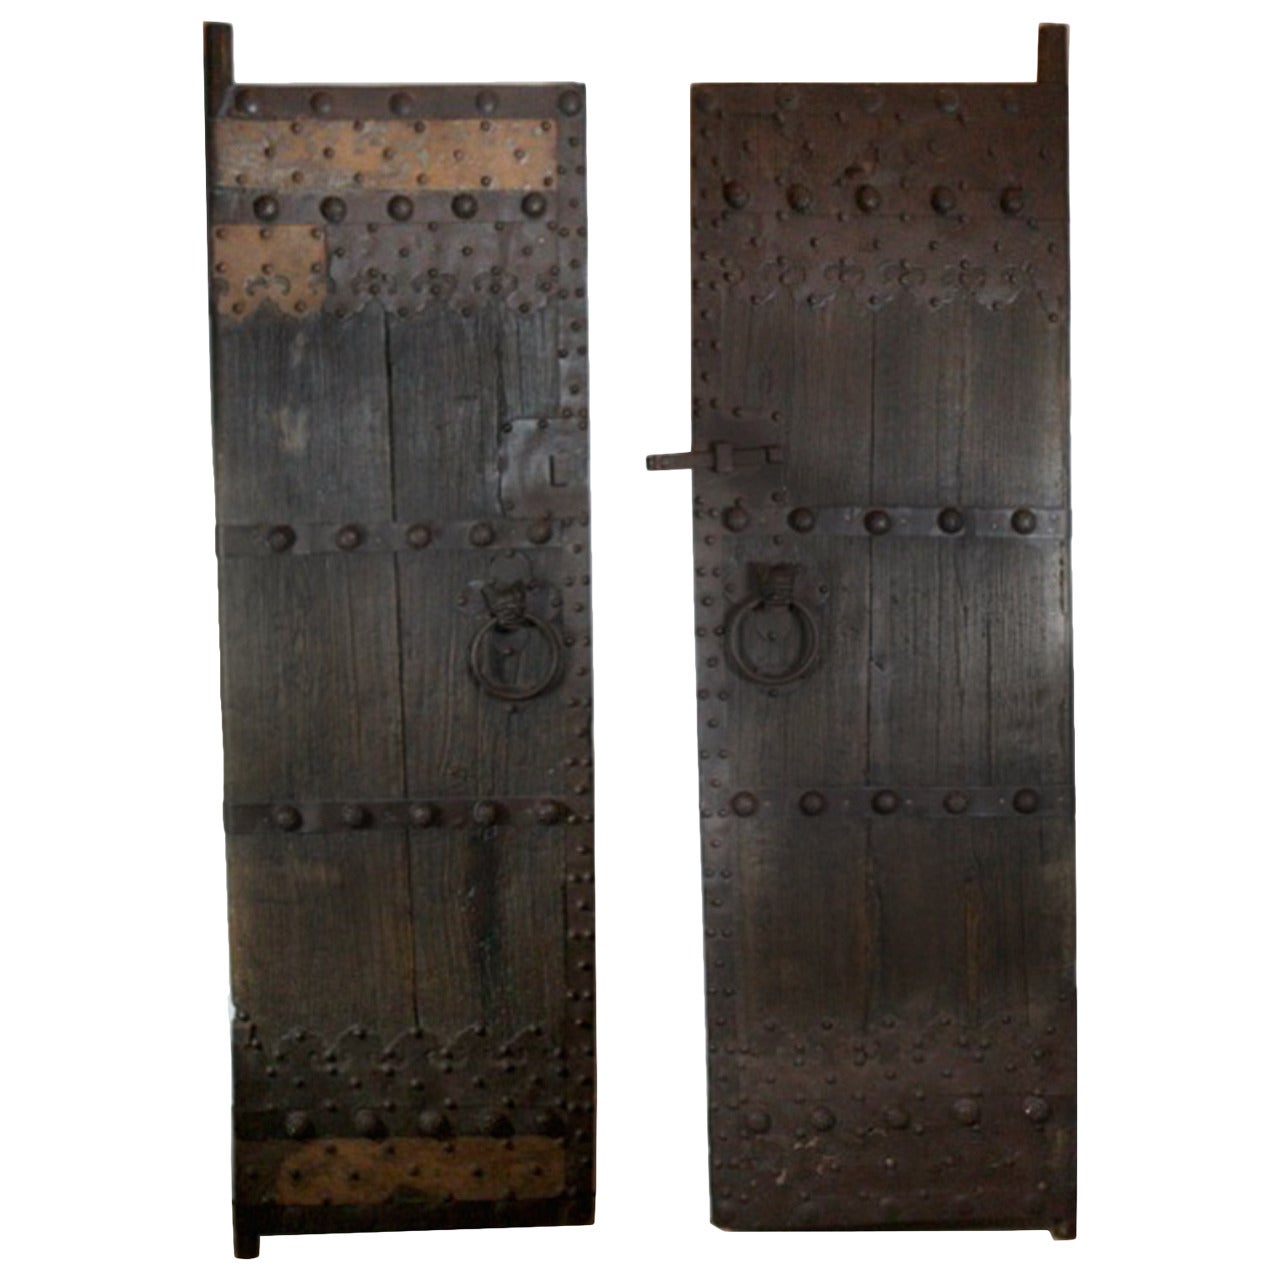 Late 19th c. Studded Elmood and Cast Iron Chinese Garden Gate Doors c. 1860-1890